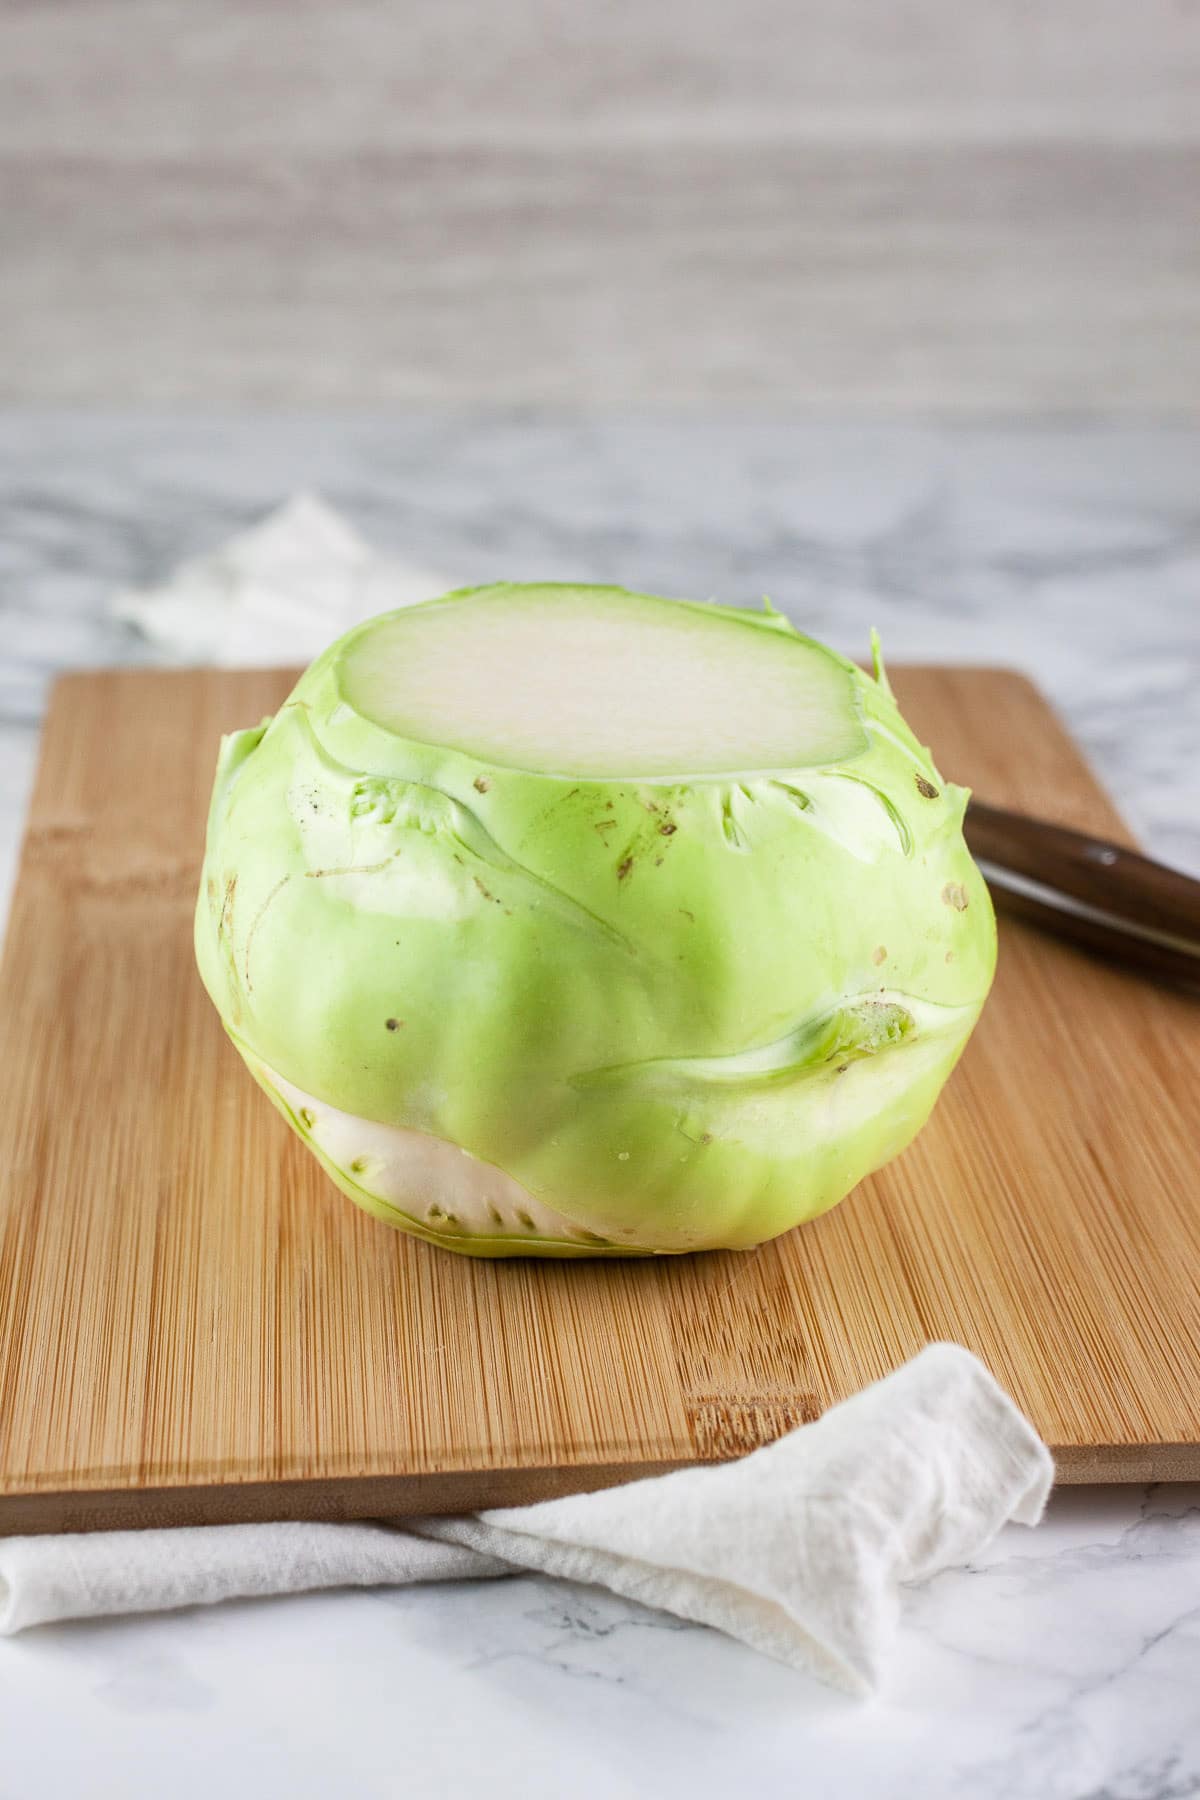 Kohlrabi with top sliced off on wooden cutting board with knife.